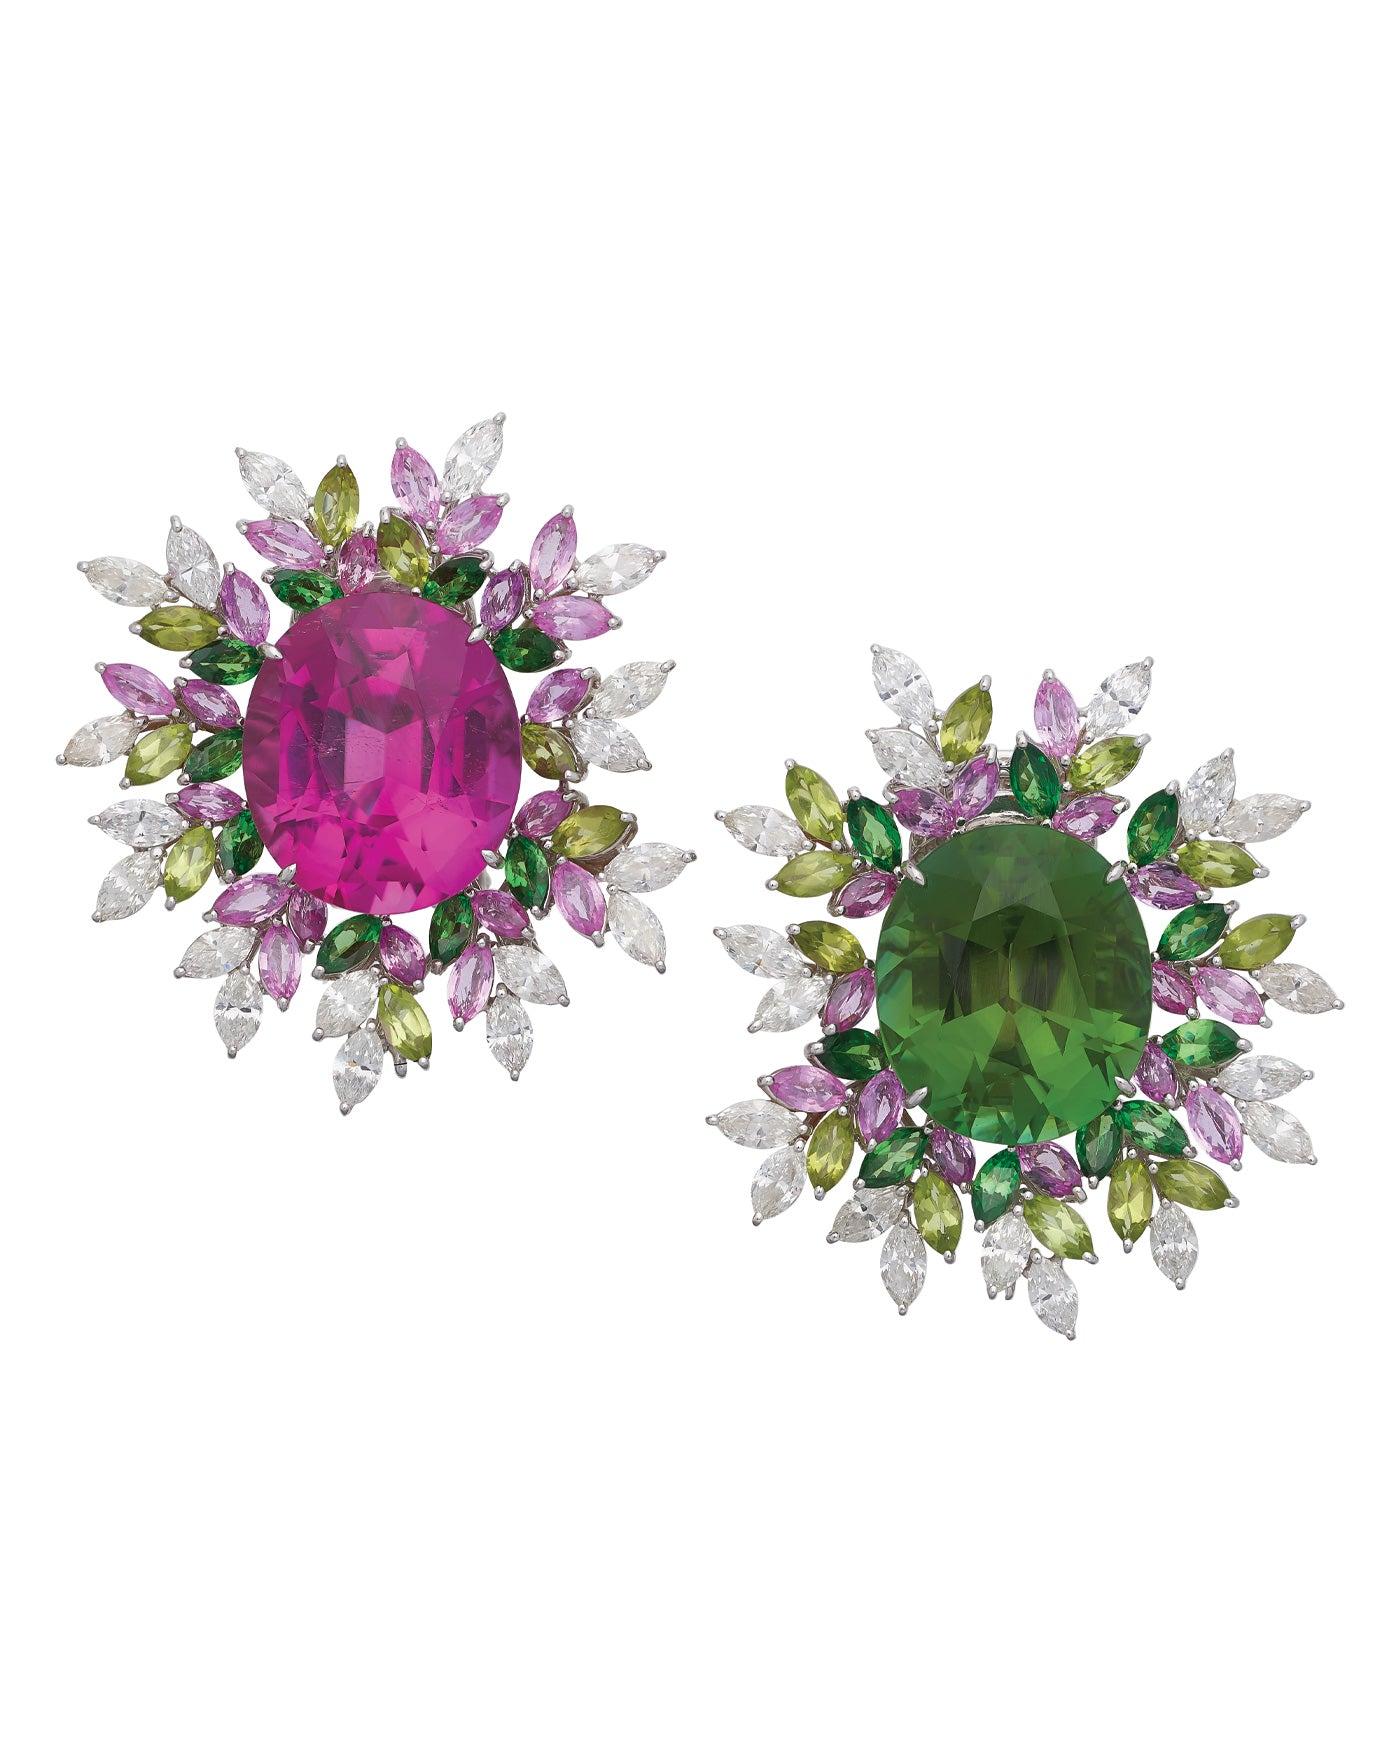 Majestic 27.90ct Tourmaline and 28.78ct Rubellite ‘mix match’ earrings crafted in 18 karat white gold